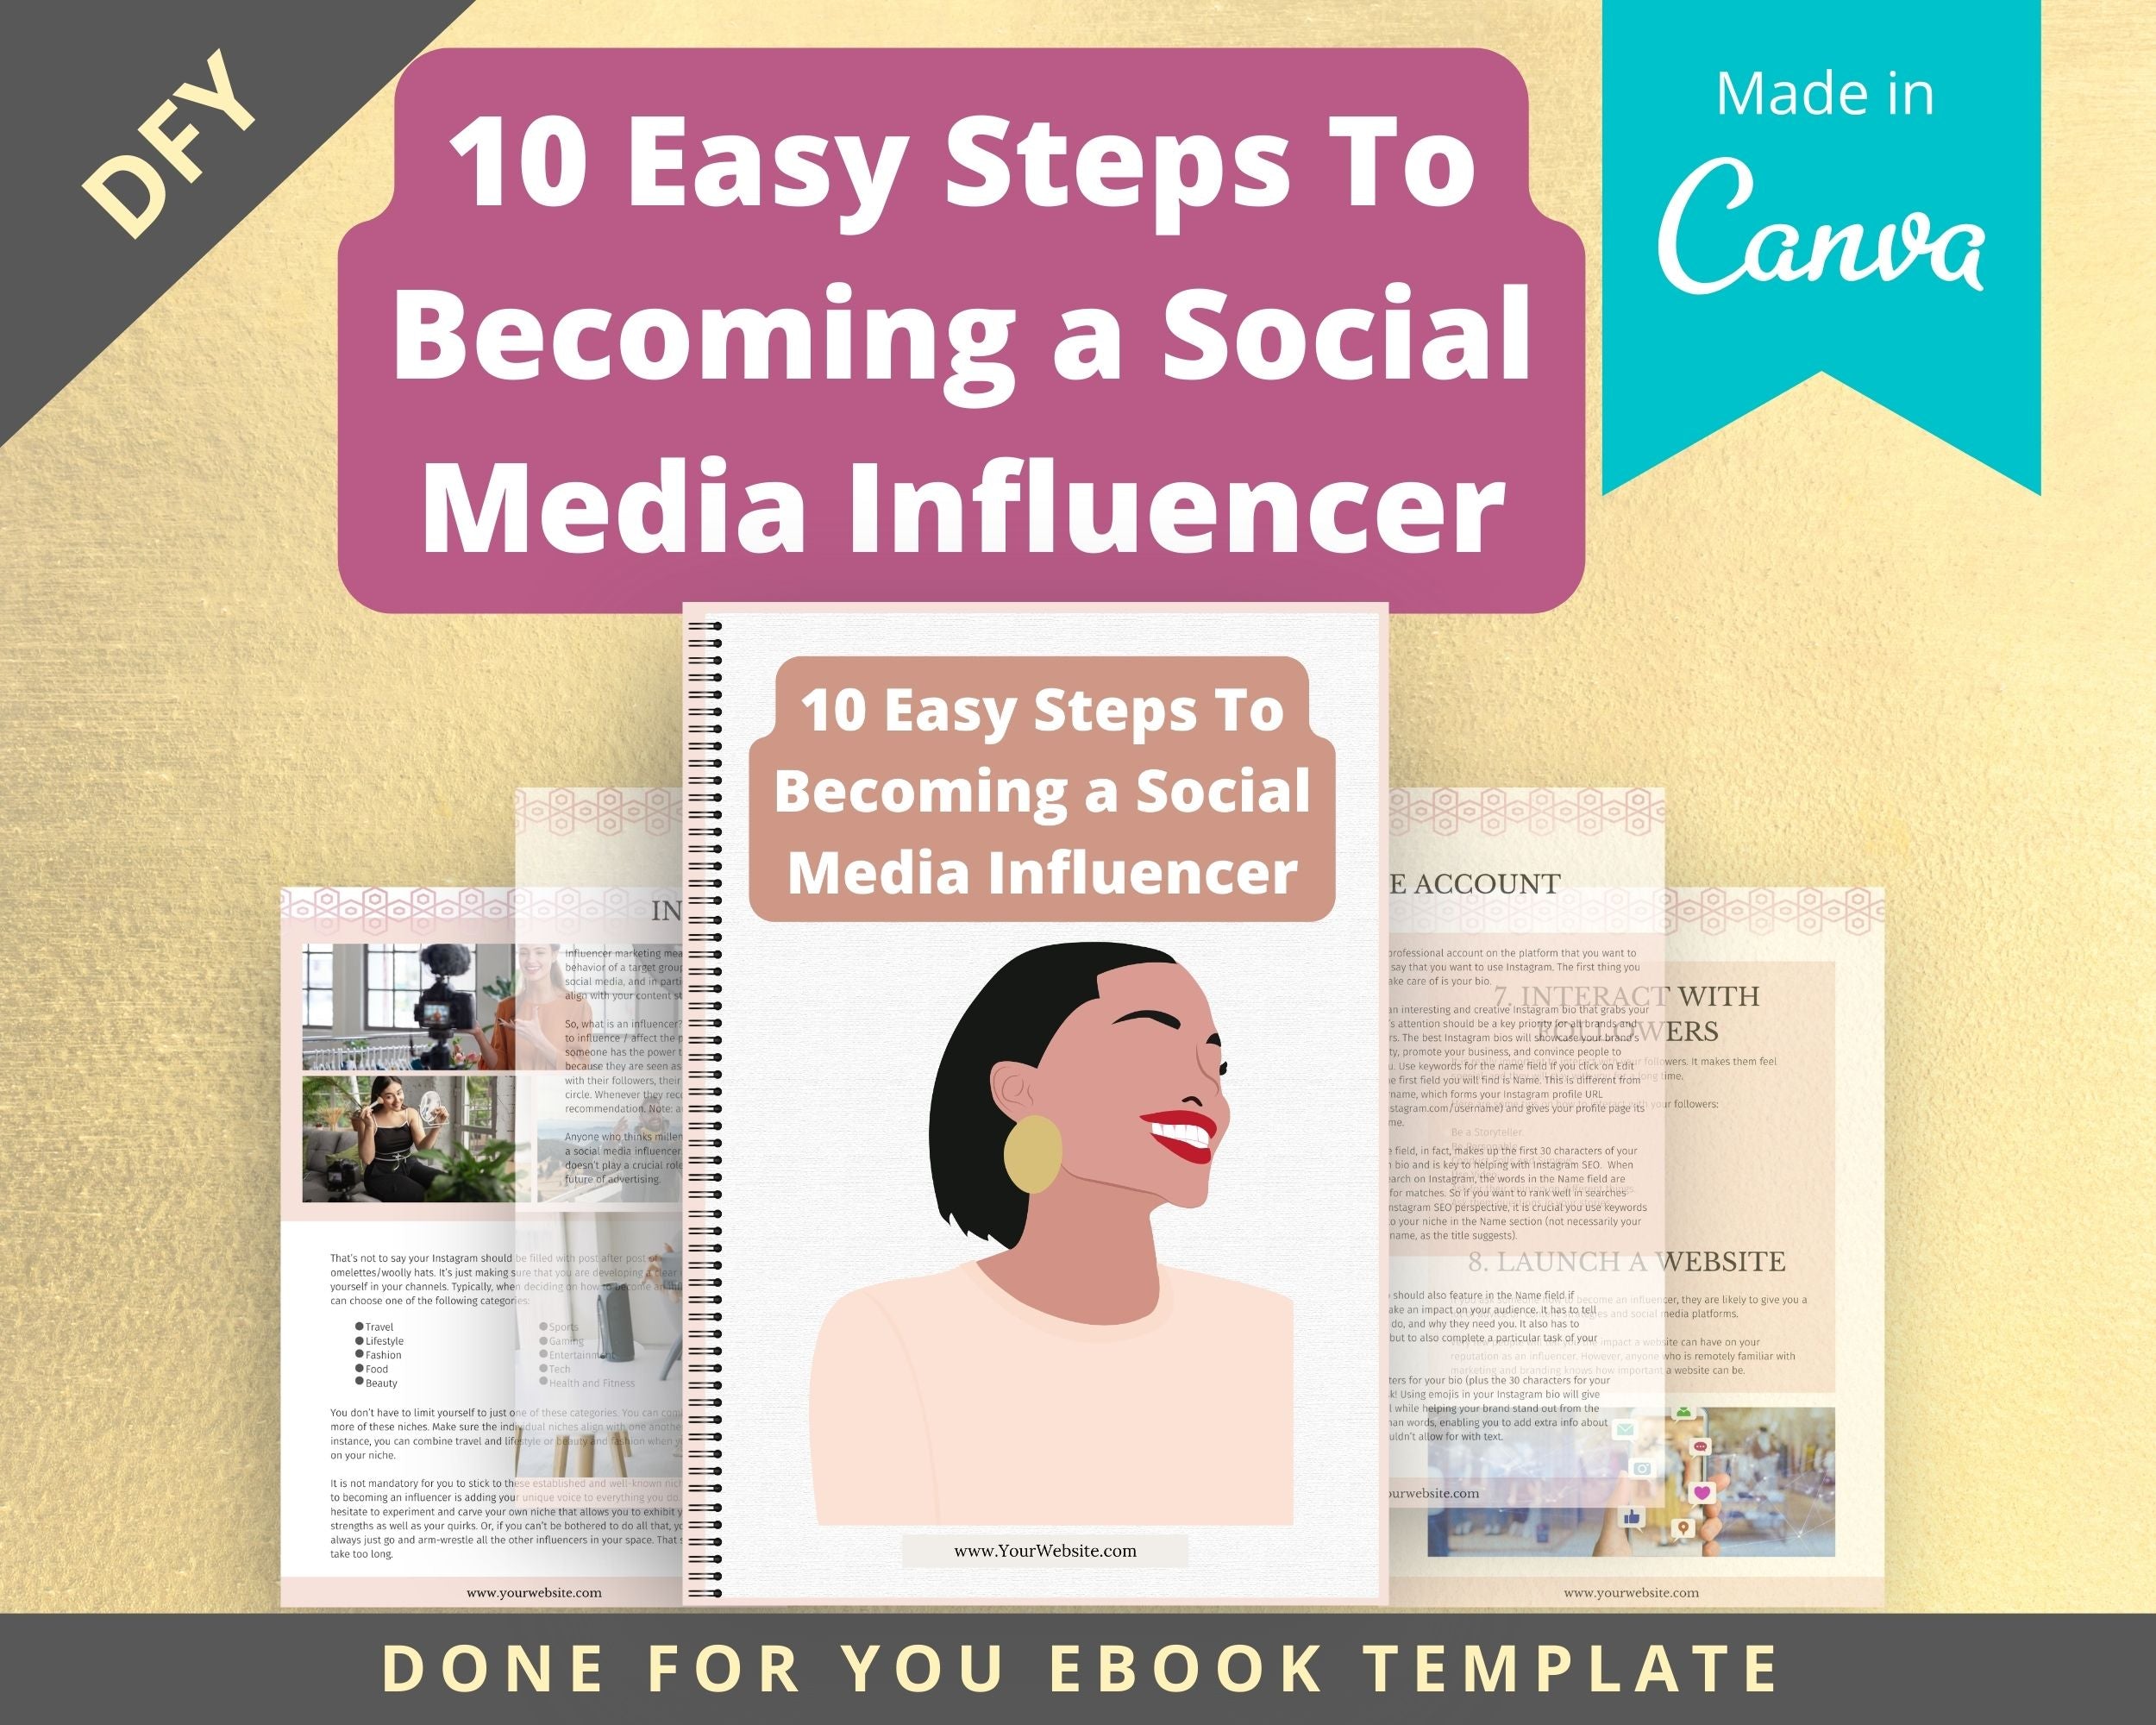 Editable 10 Easy Steps To Becoming a Social Media Influencer Ebook | Done-for-You Ebook in Canva | Rebrandable and Resizable Canva Template